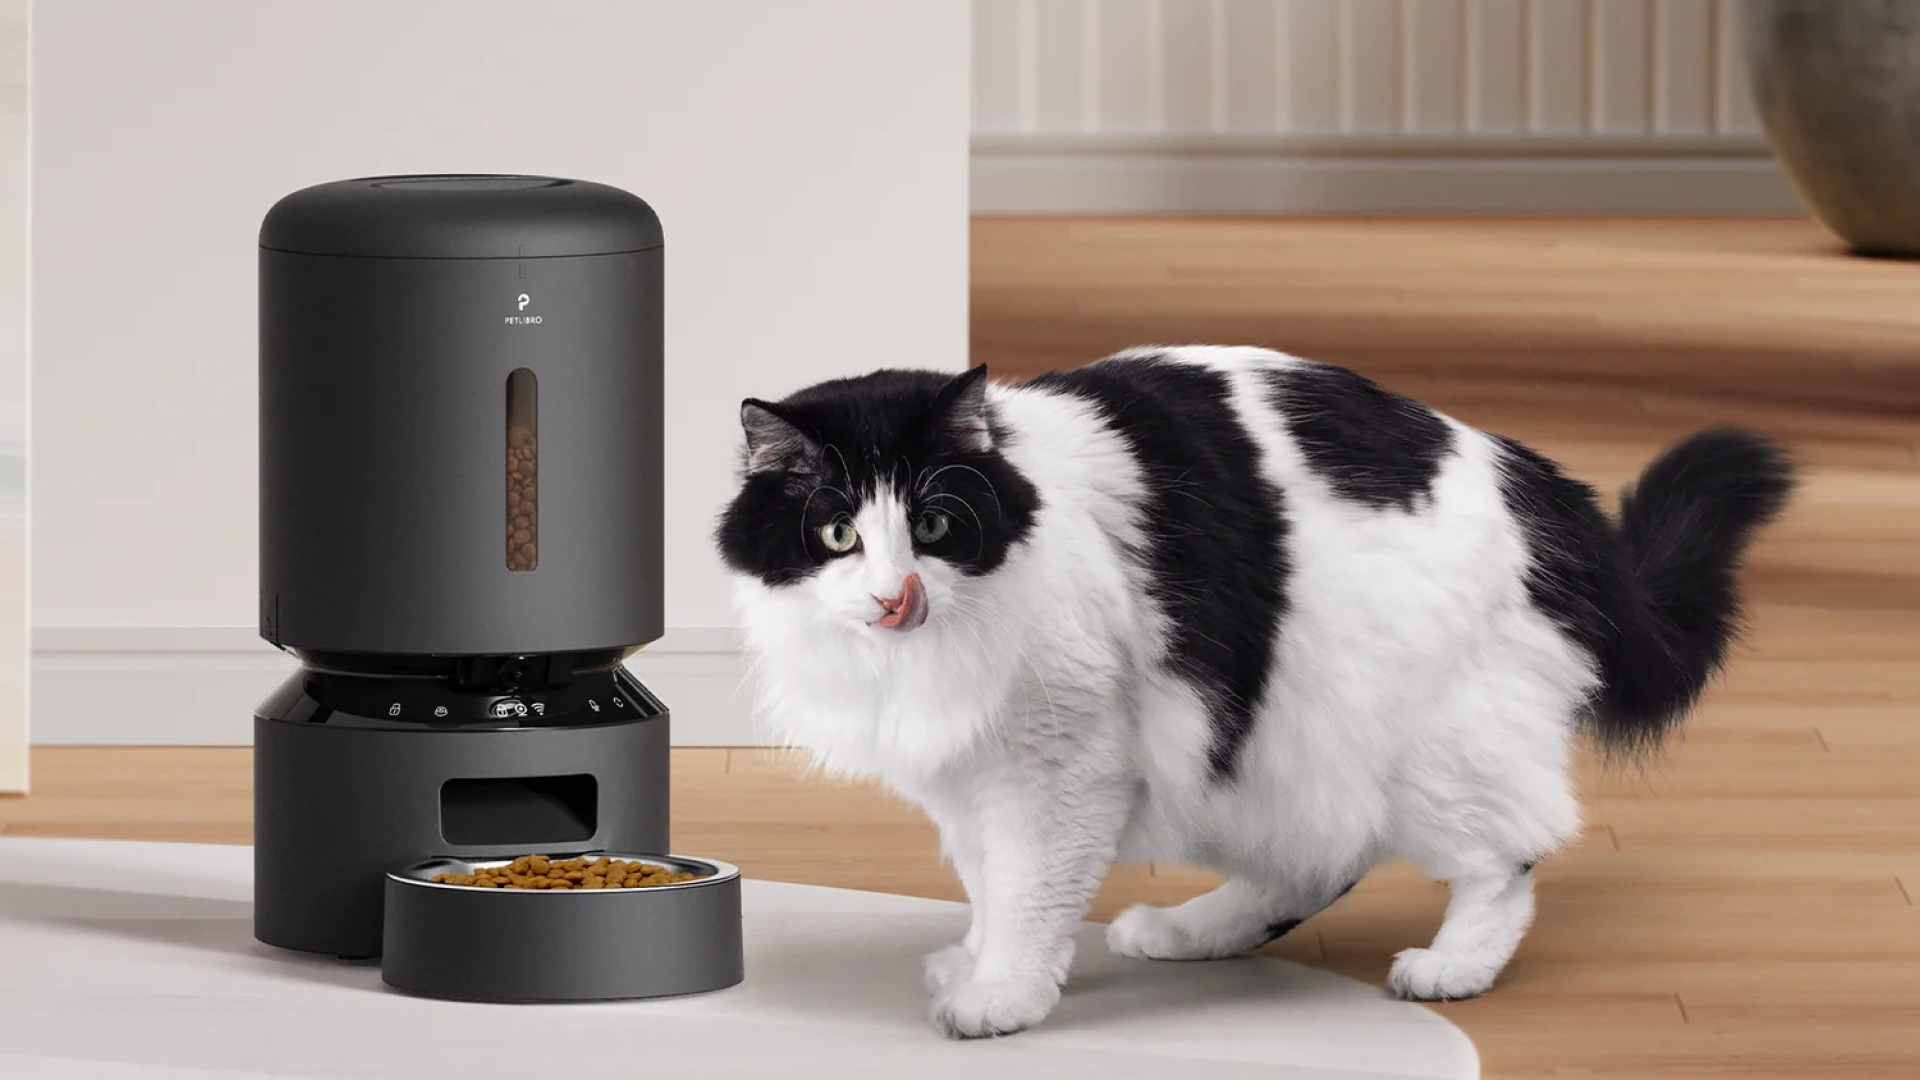 Petlibro Automatic Cat Food Dispenser is 20% off on